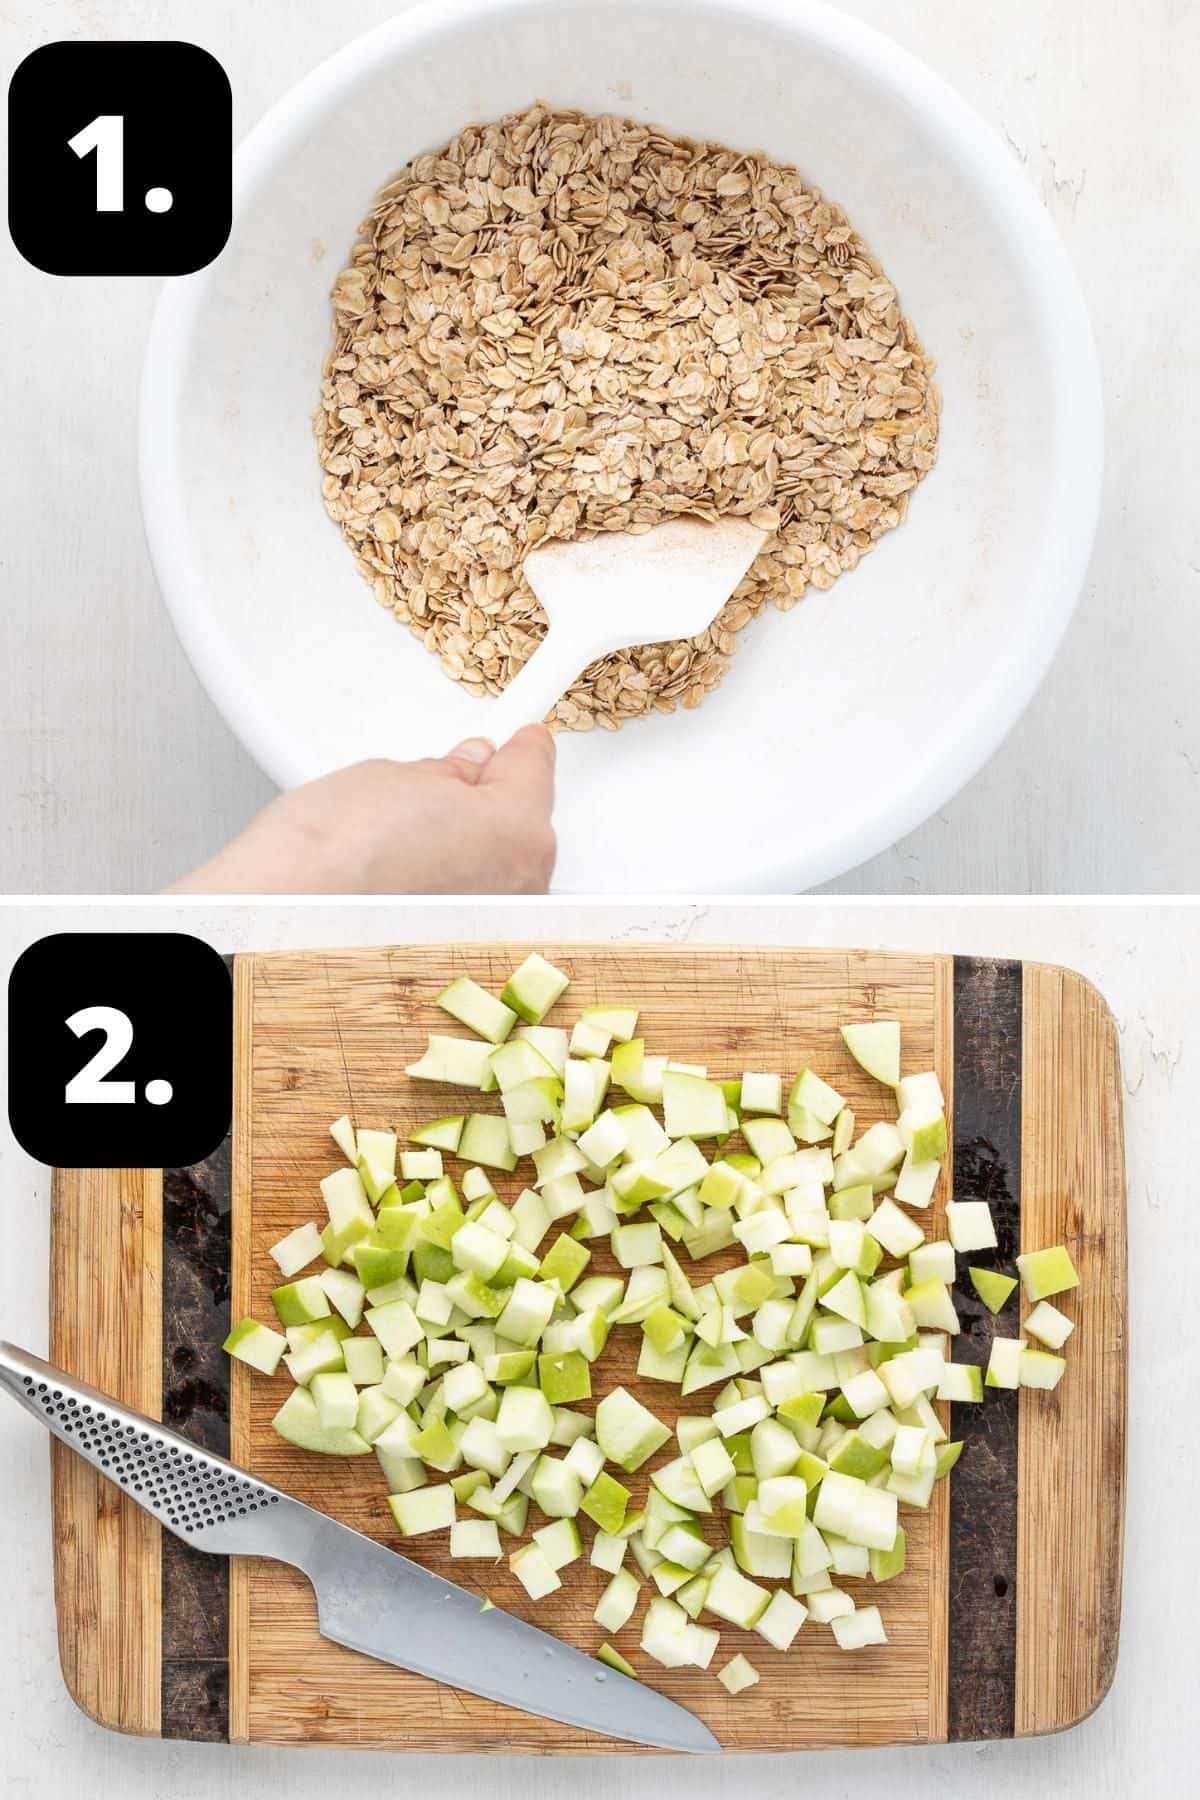 Steps 1-2 of preparing this recipe - mixing the dry ingredients together in a bowl and chopping the apple into small cubes.